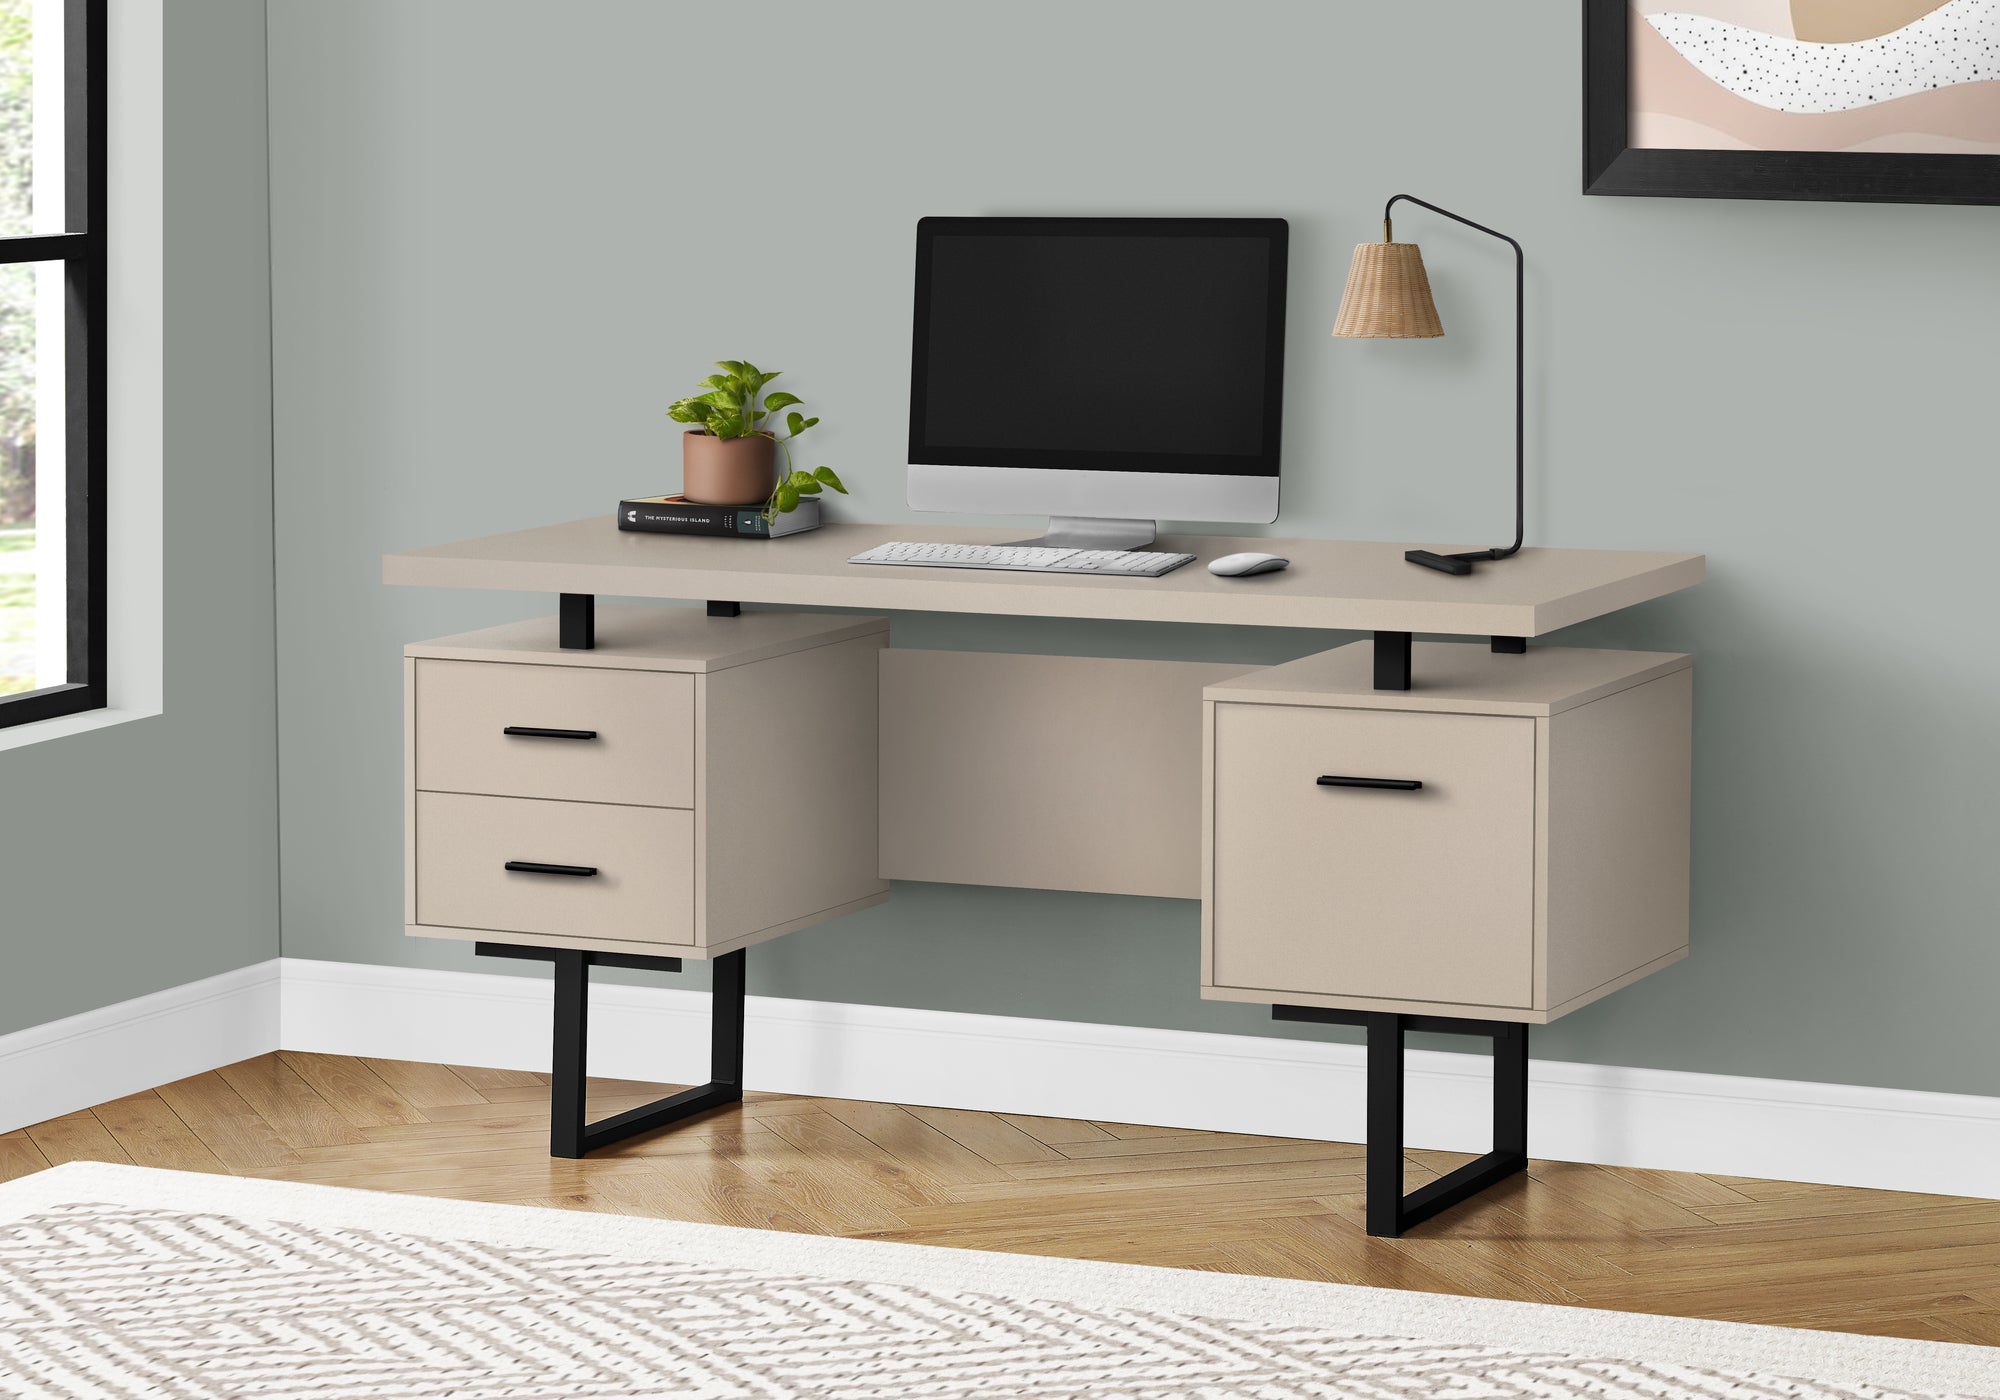 MN-407629    Computer Desk, Home Office, Laptop, Left, Right Set-Up, Storage Drawers, 60"L, Metal, Laminate, Taupe, Black, Contemporary, Modern